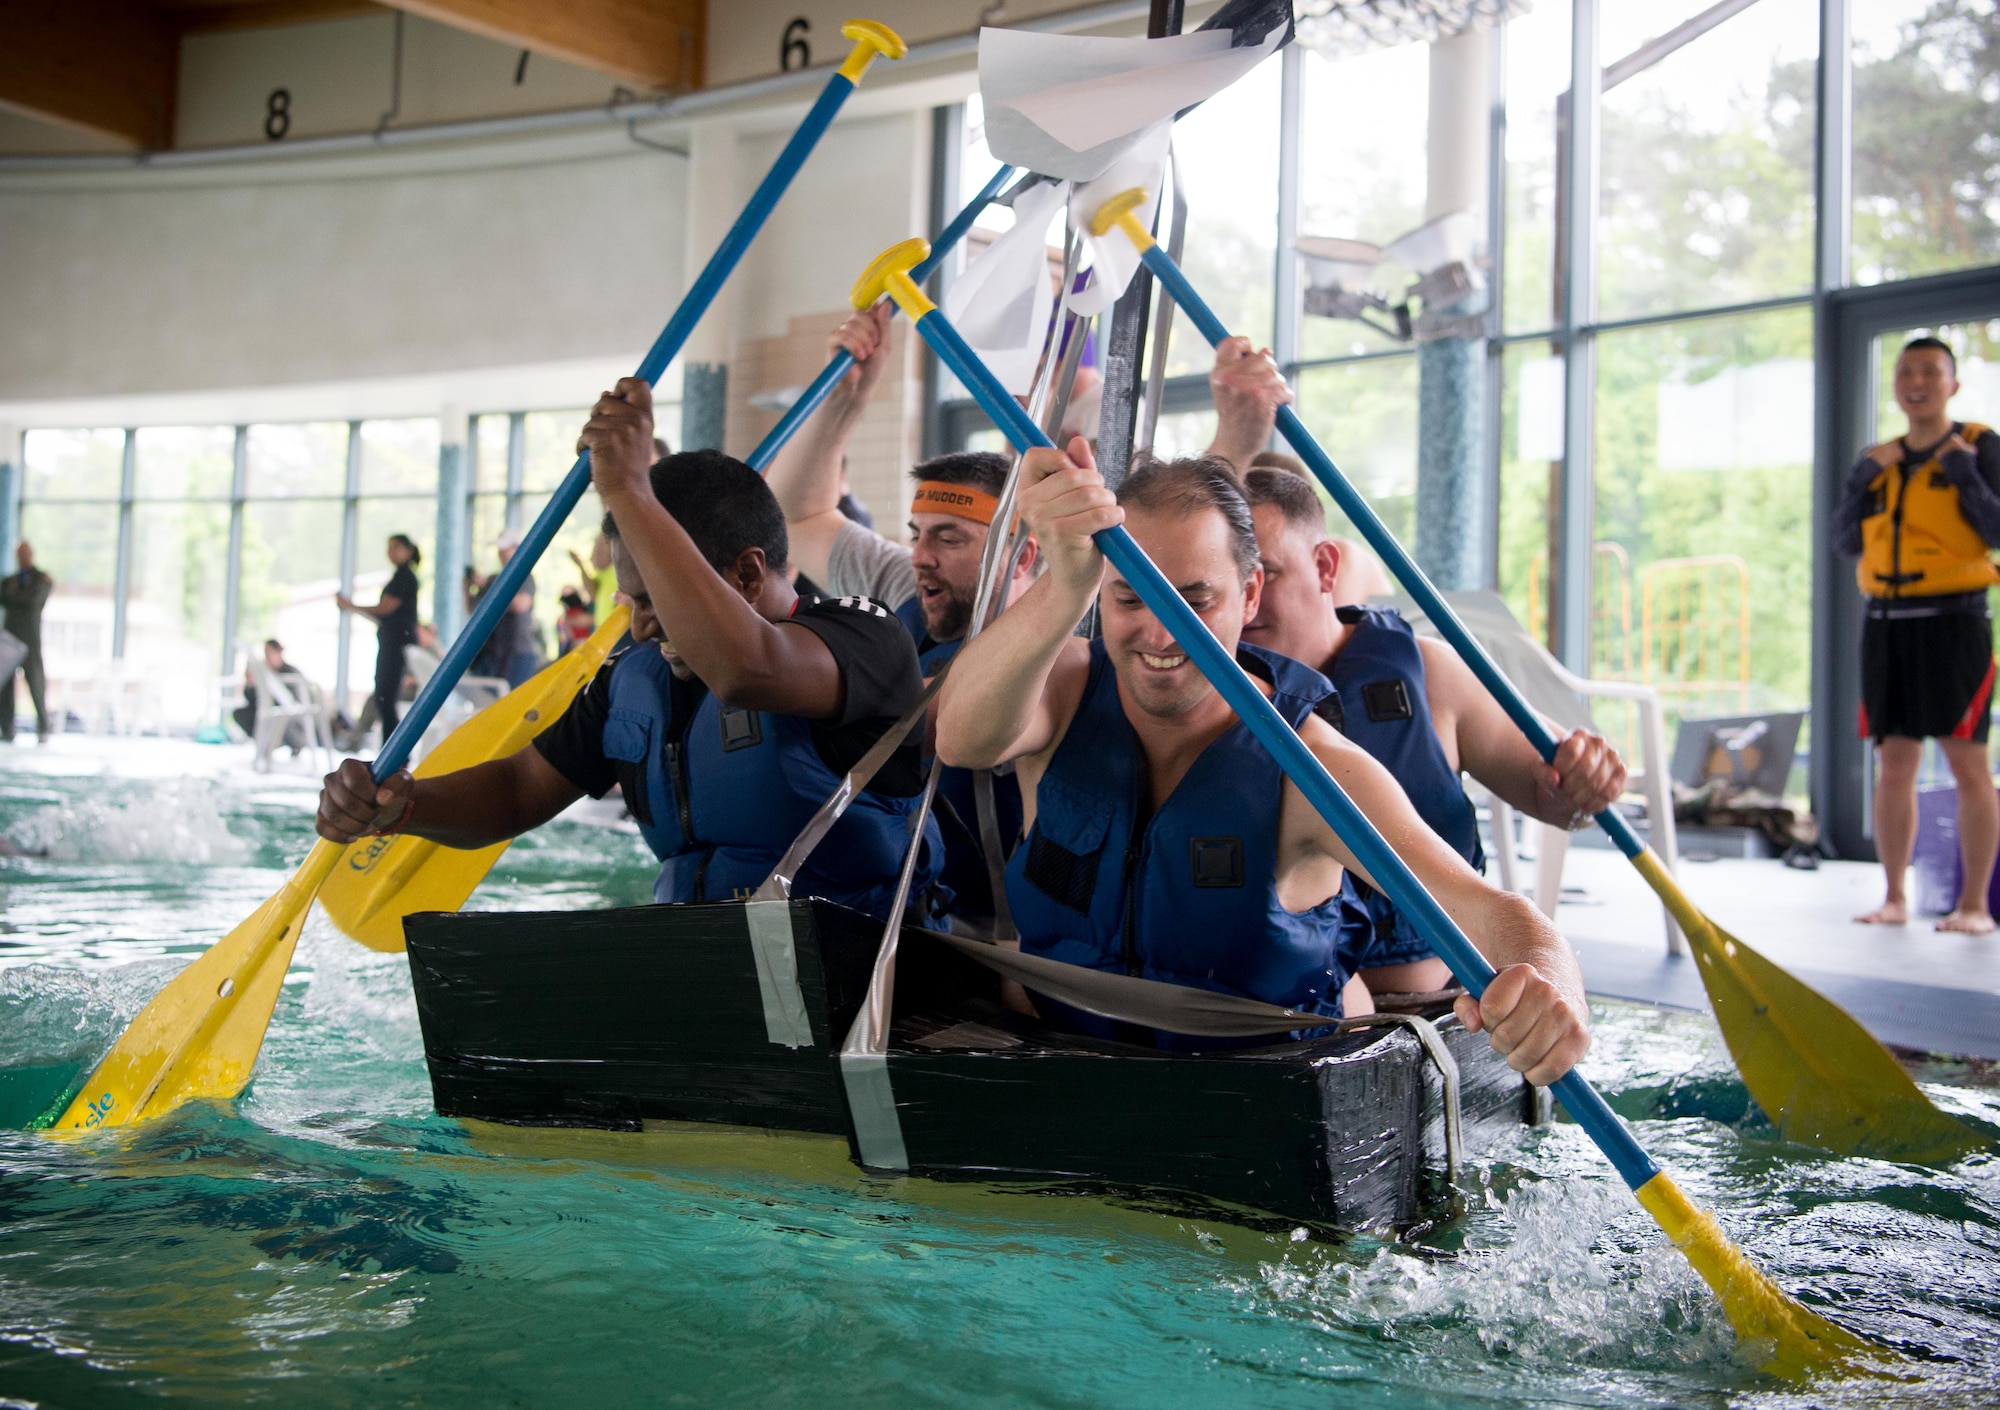 The 86th Medical Squadron Landstuhl Regional Medical Center's Battle of the Battleships team, the "Purple Parrots," race their homemade "battleship" at the Ramstein Aquatic Center on Ramstein Air Base, May 19, 2017. Teams of Airmen assigned to various squadrons designed and built "battleships" out of cardboard and duct tape, which they used to compete for aquatic superiority. The 86th Force Support Squadron Ramstein Aquatic Center hosts Battle of the Battleships annually to foster community and morale in the Kaiserslautern Military Community. (U.S. Air Force photo by Senior Airman Elizabeth Baker)